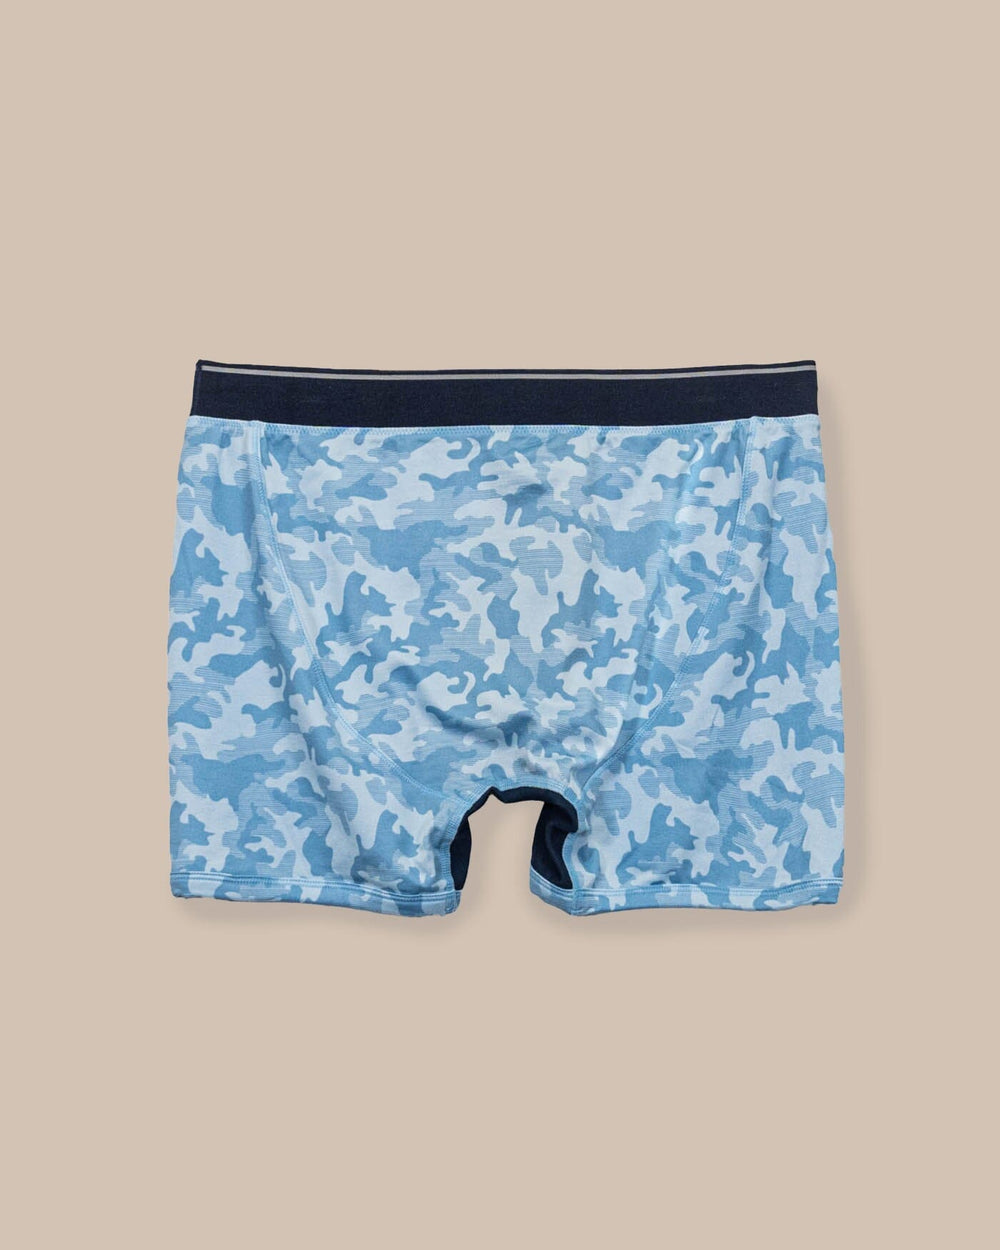 The back view of the Southern Tide Island Camo Boxer Brief by Southern Tide - Clearwater Blue